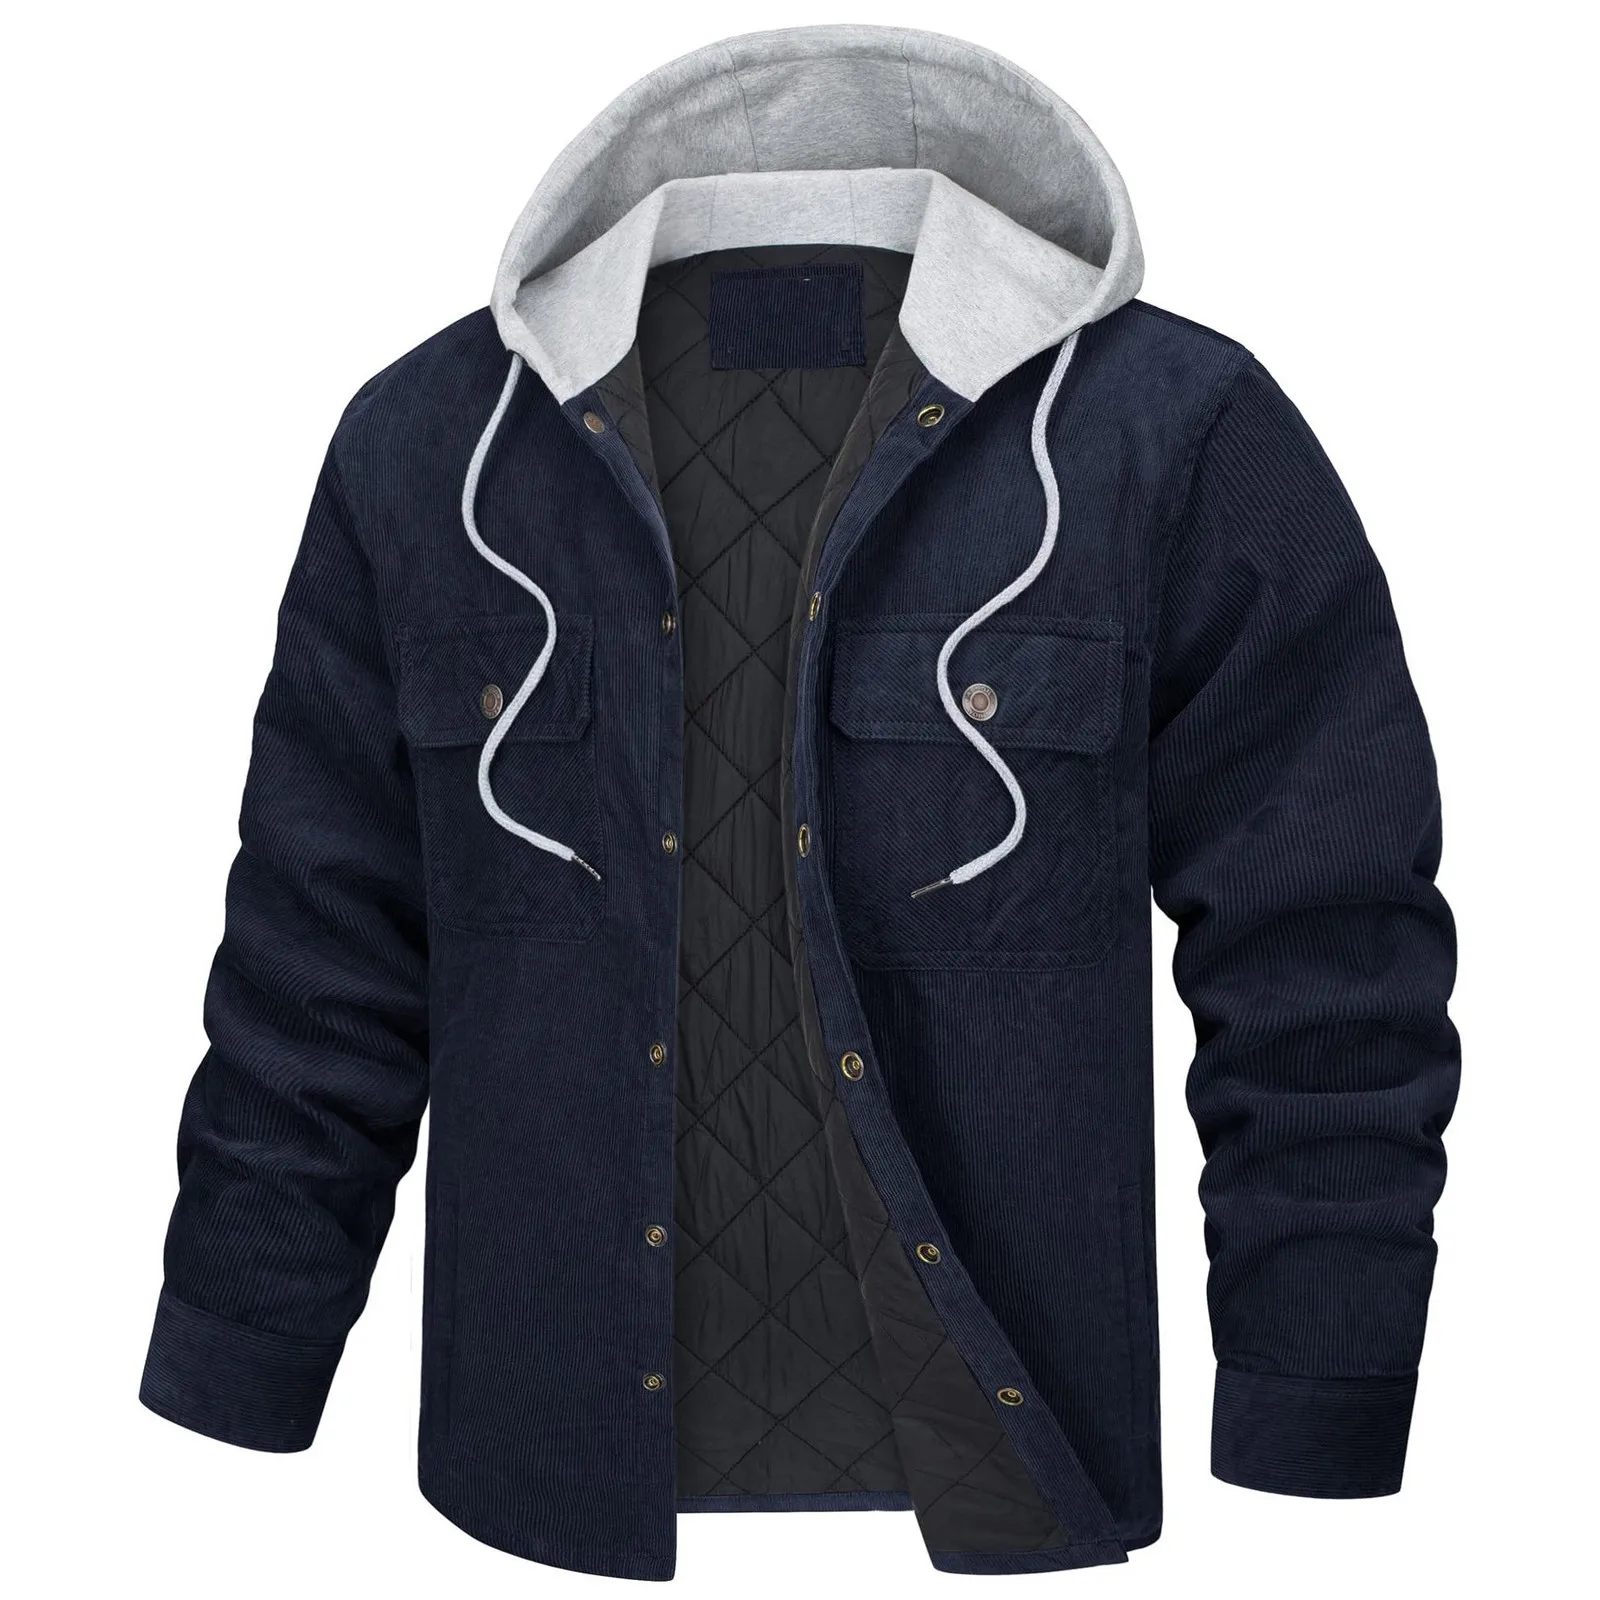 

Men'S Corduroy Winter Warm Quilted Lined Padded Hoodies Cotton Casual 5 Pockets Hooded Button Down Jackets & Coats Chamarras